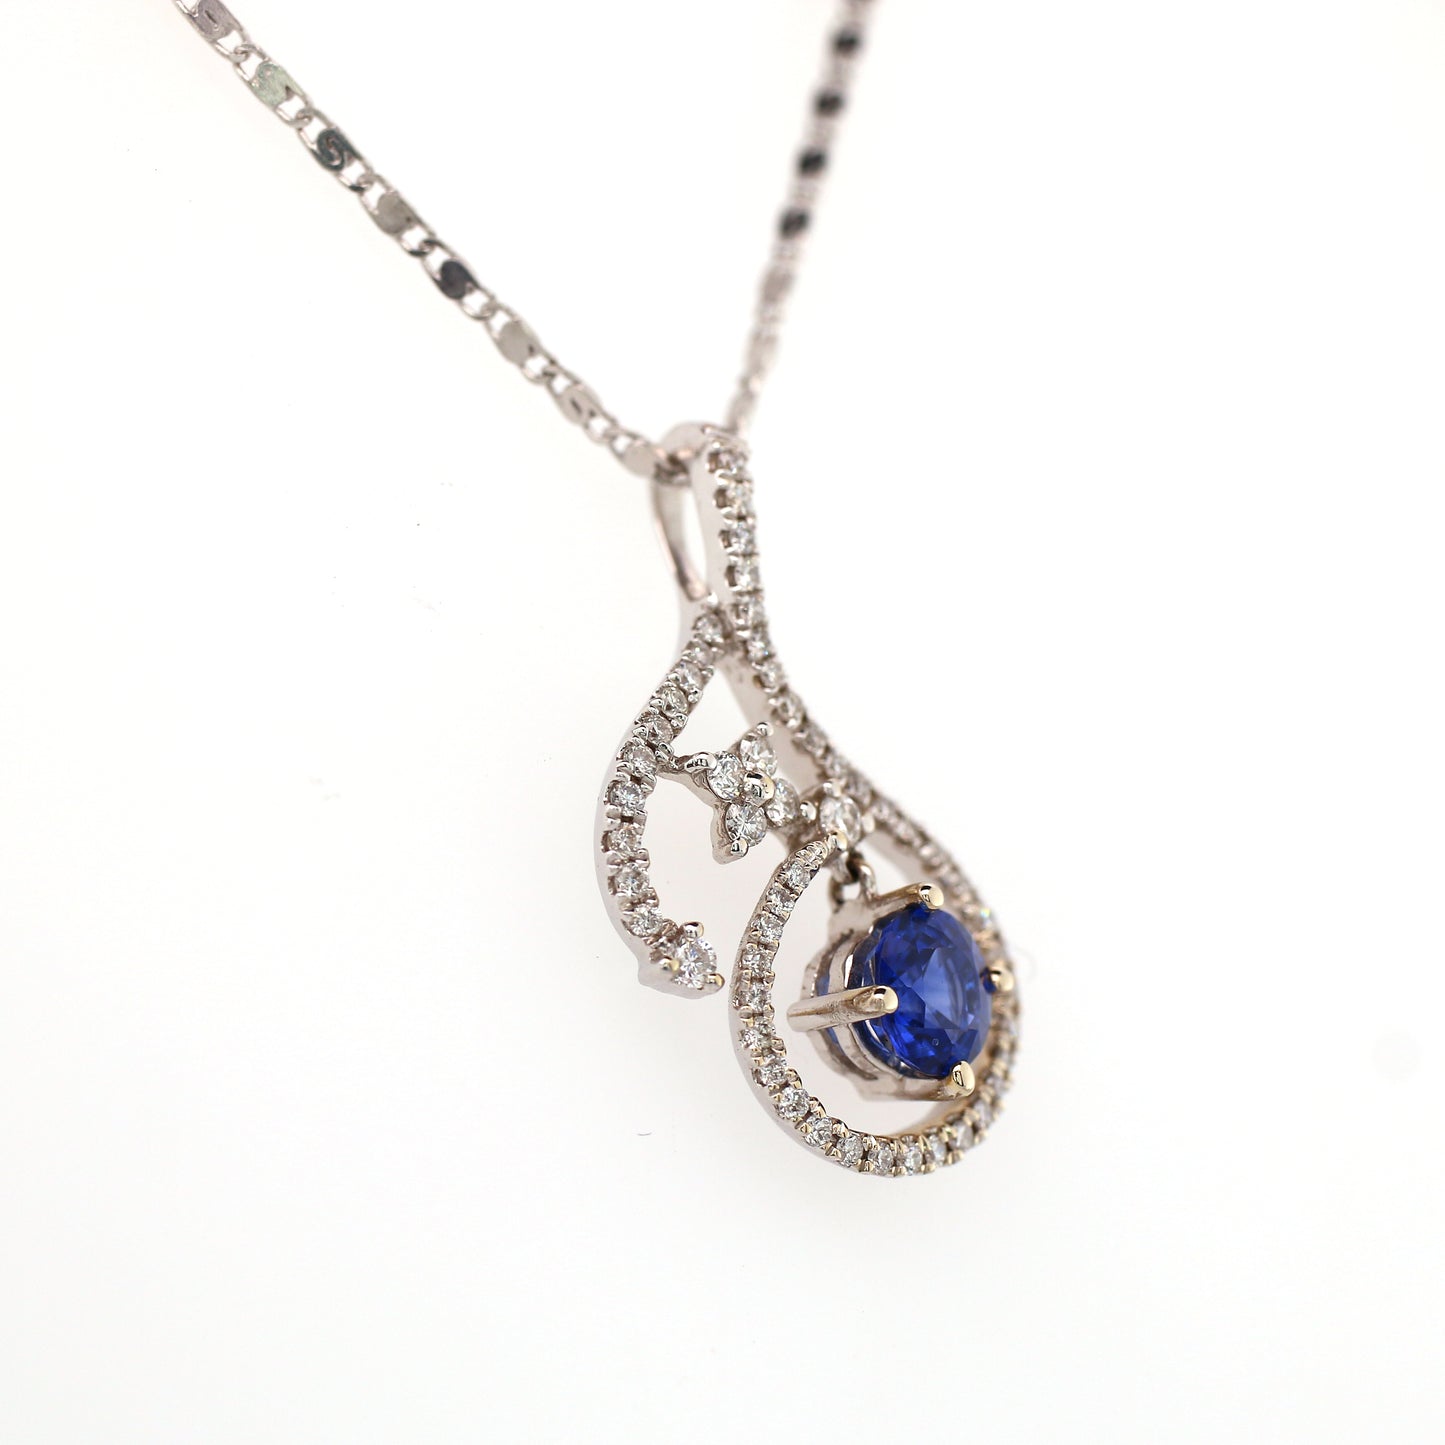 Vivid Blue Sapphire has been Elegantly set with Natural Diamonds to create this 18kt White Gold Pendant.